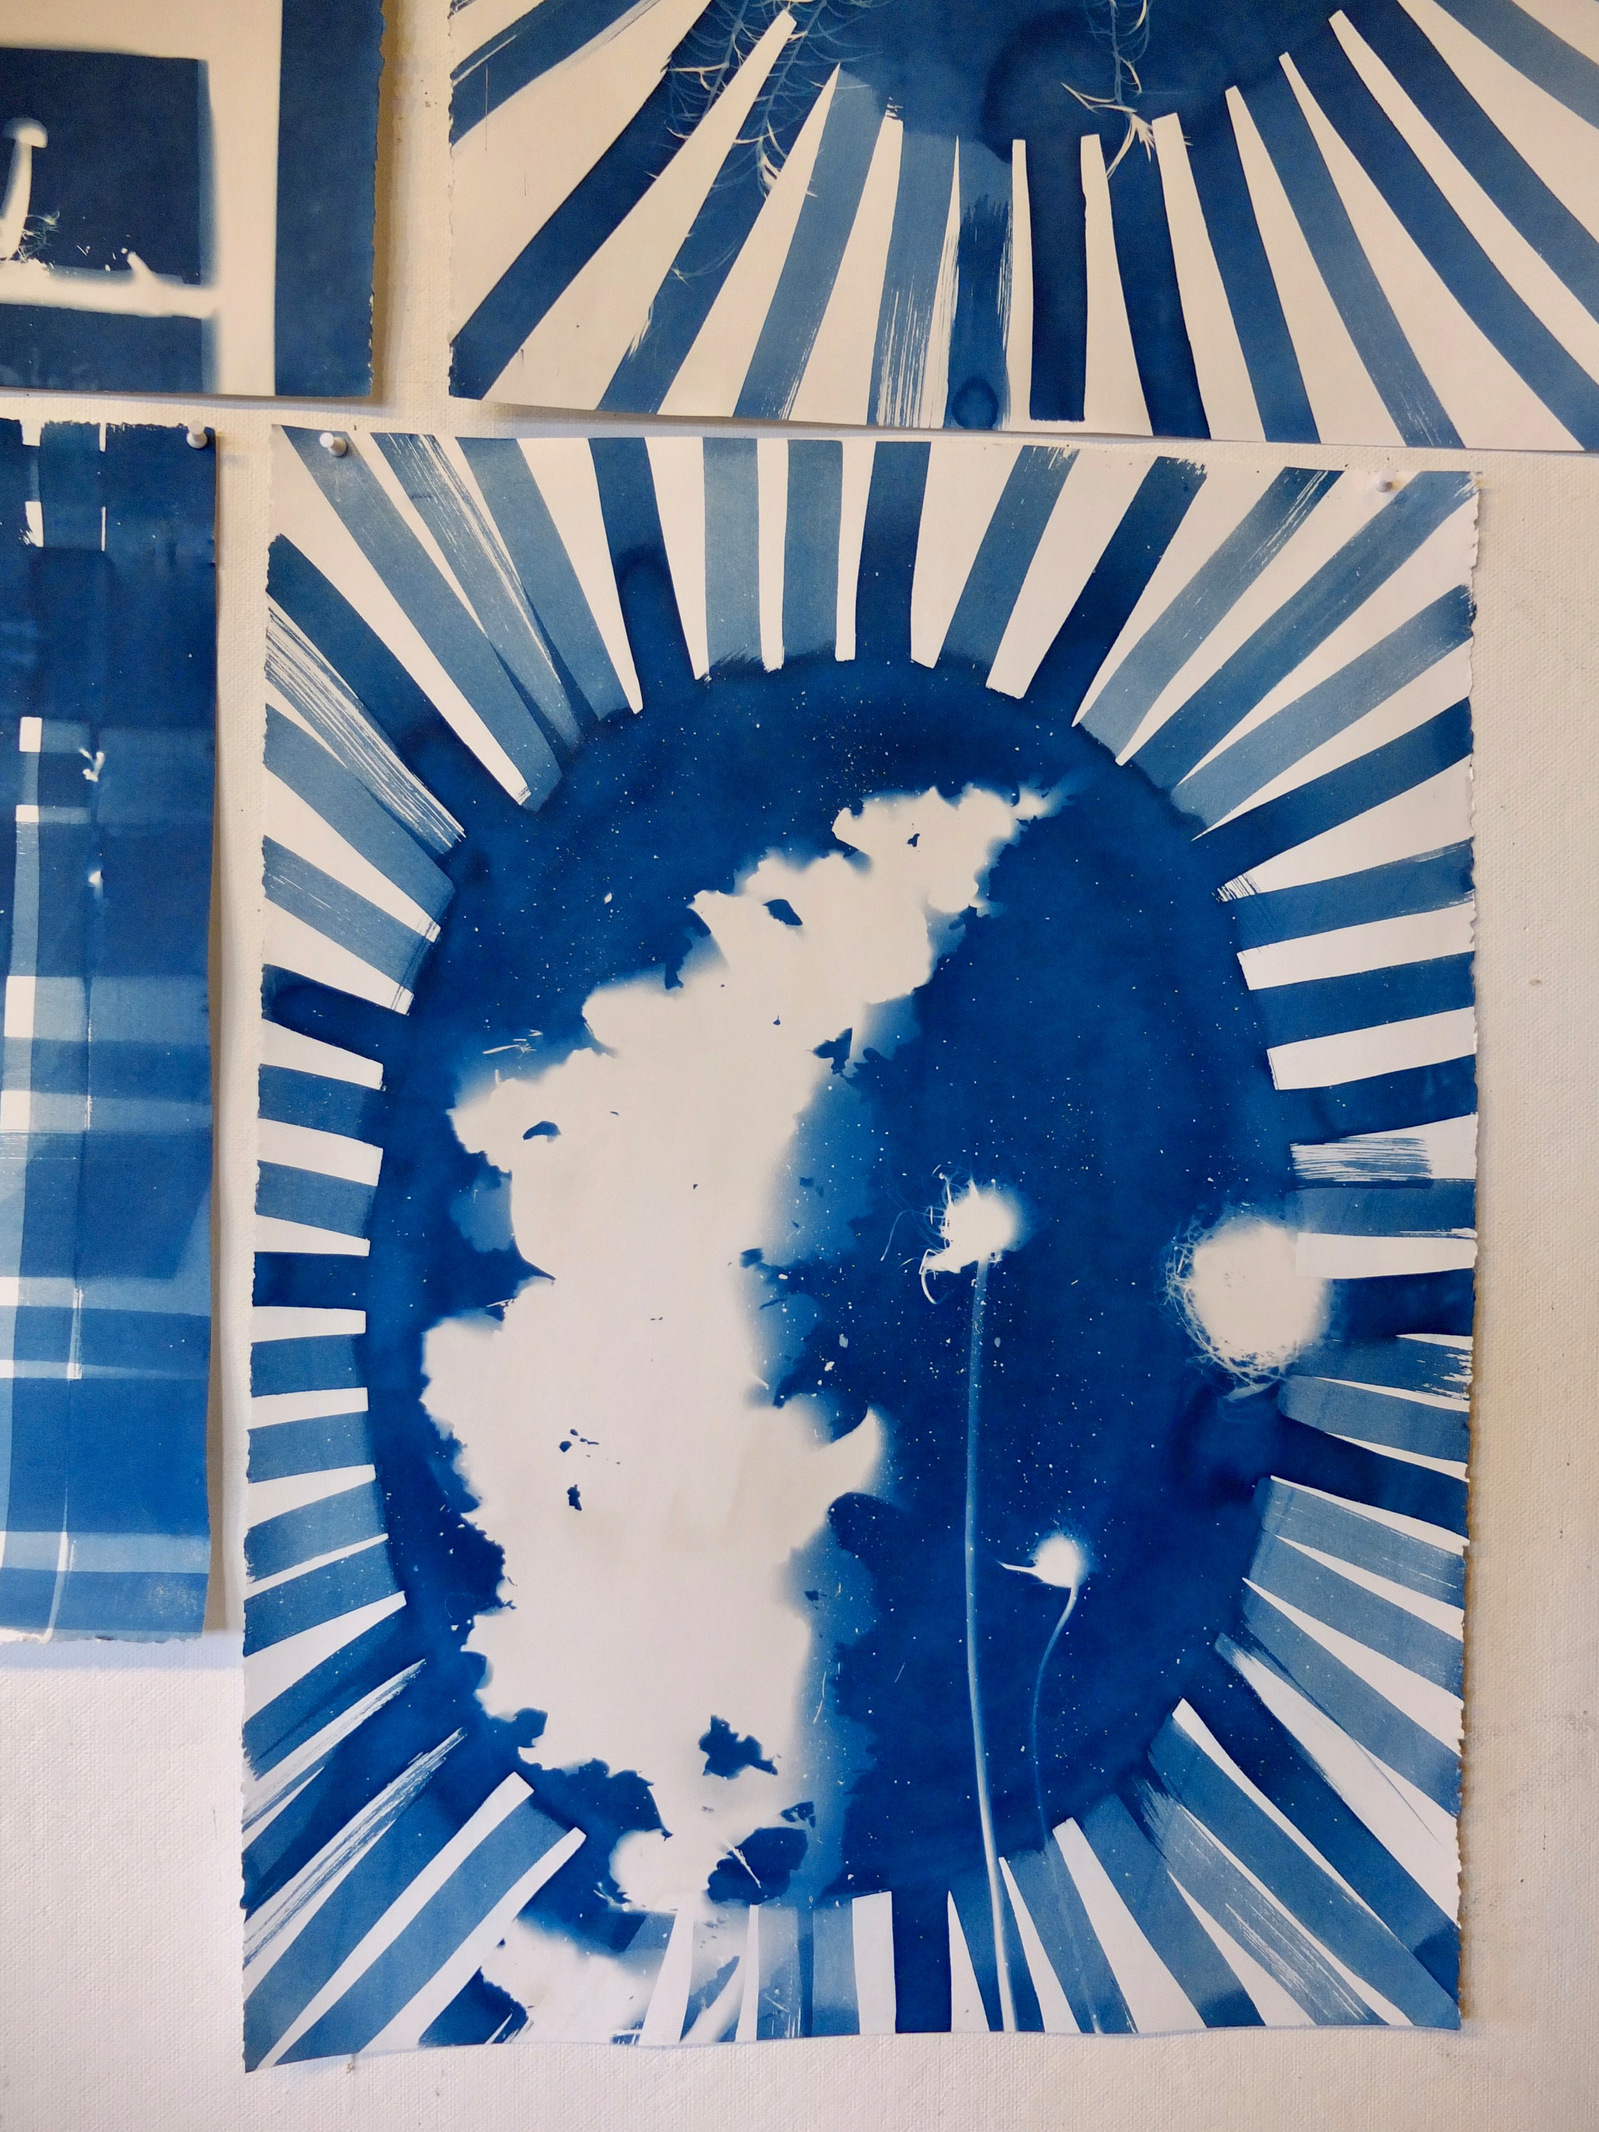 image of lettuce bolting or going to seed in a oval sunburst shape with stripes made with cyanotype on paper